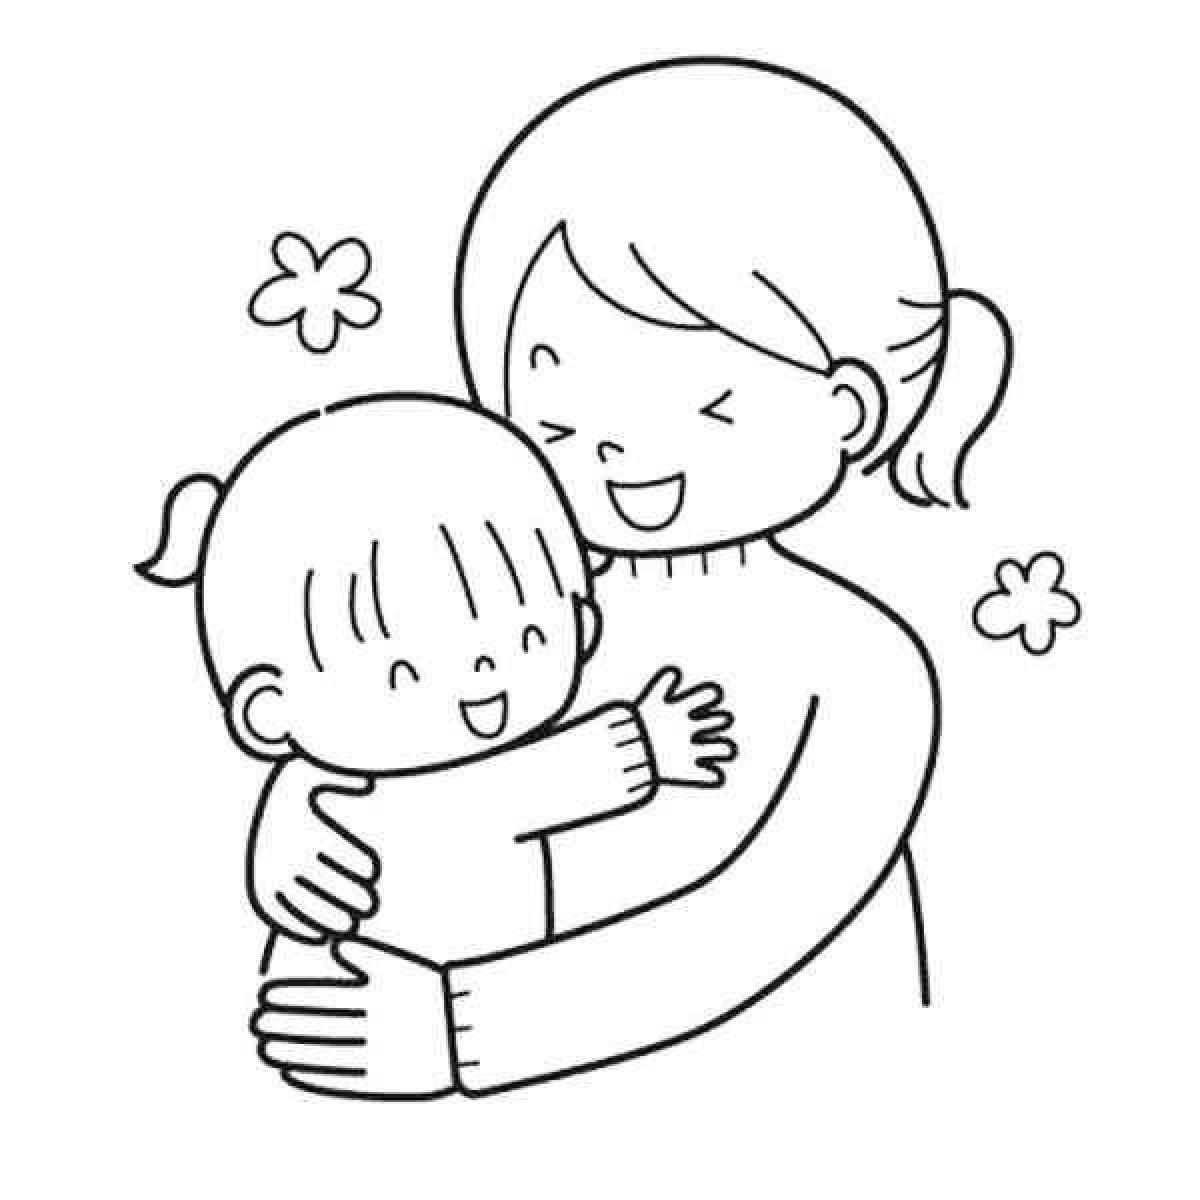 Snuggly coloring page hugs